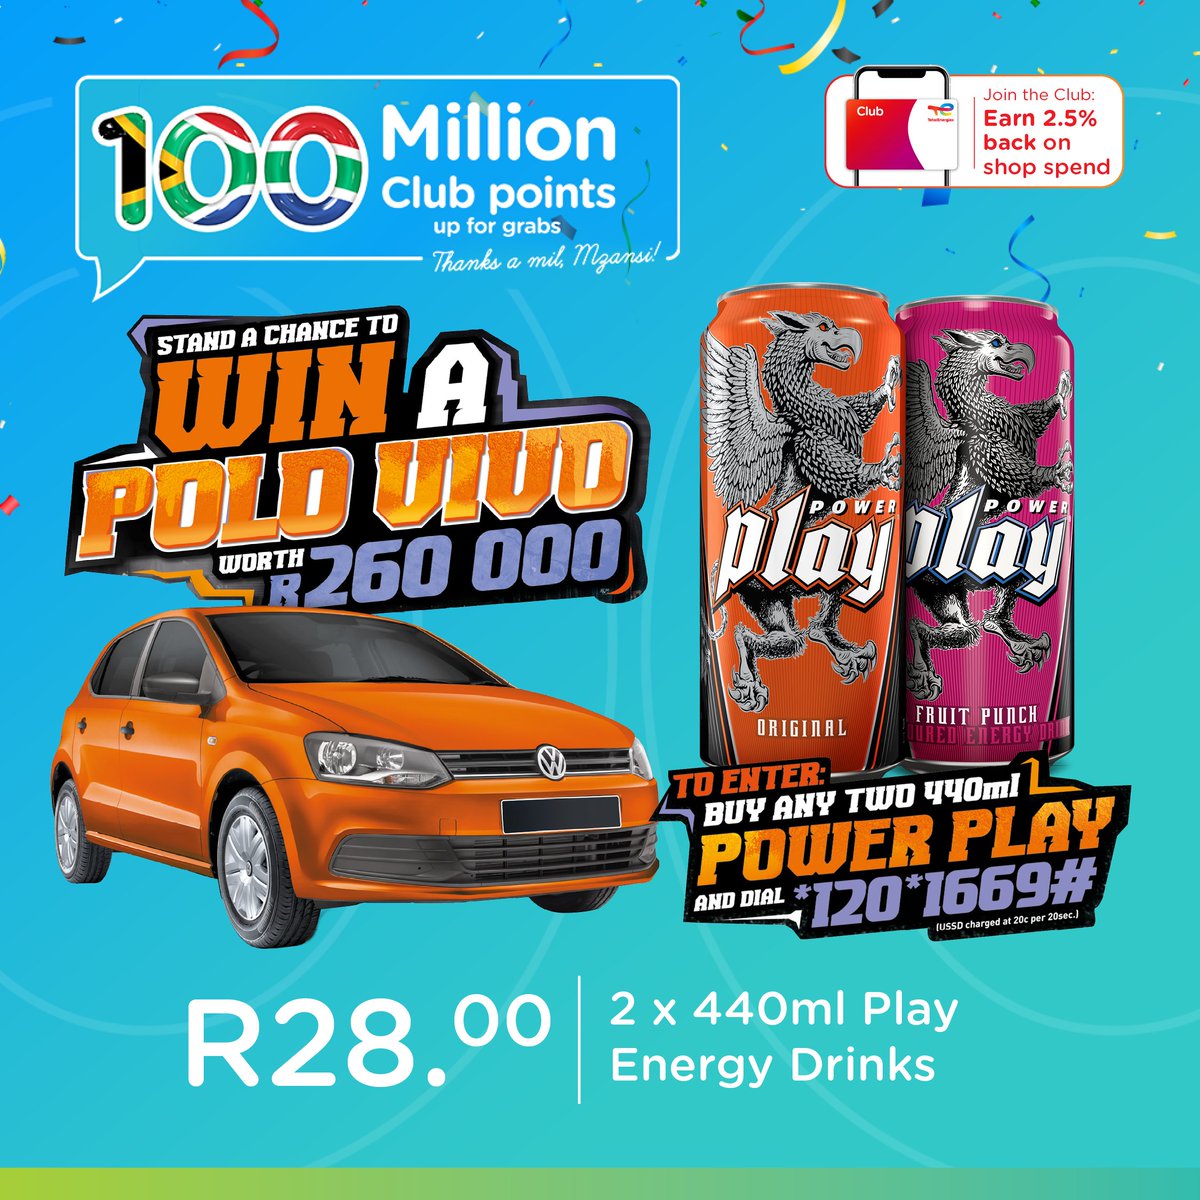 Calling on all petrol heads! @PlayEnergyDrink is putting you in the driver’s seat to win a Volkswagen Polo Vivo worth R260 000! Grab any 2 of those powerful 440ml Power Play Energy Drinks Dial *120*1669# Rev your engines! This adrenaline-pumping promotion ends on August 6th